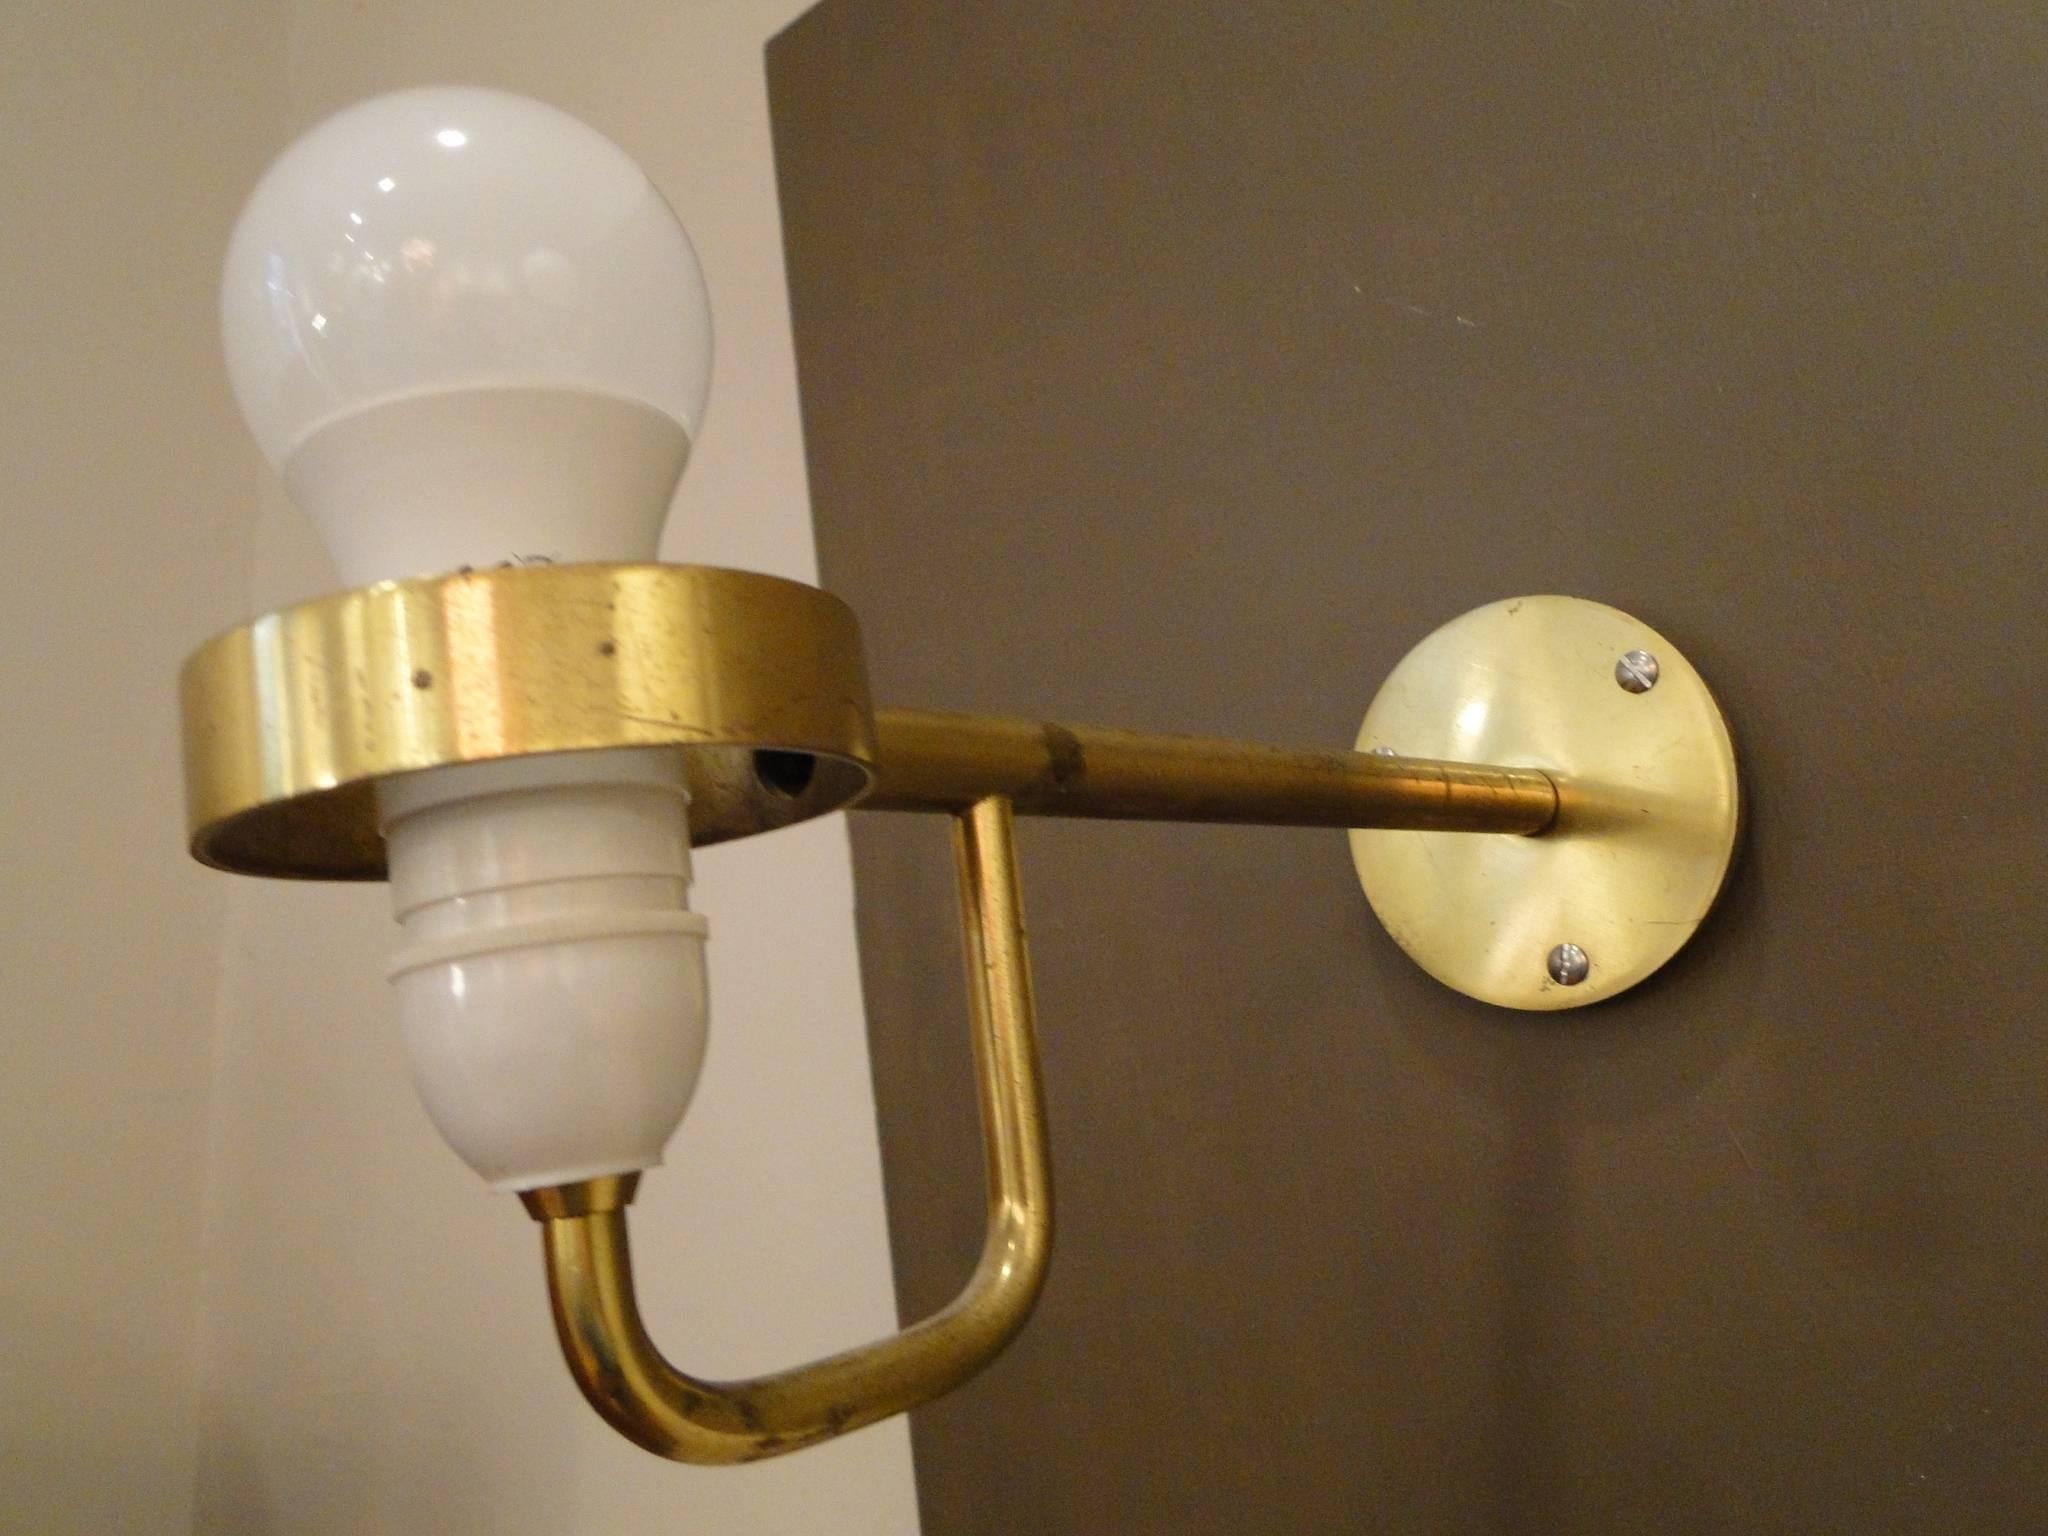 Mid-20th Century Danish Modernist Cased Glass and Brass Wall Light by Bent Karlby for Lyfa, 1950s For Sale